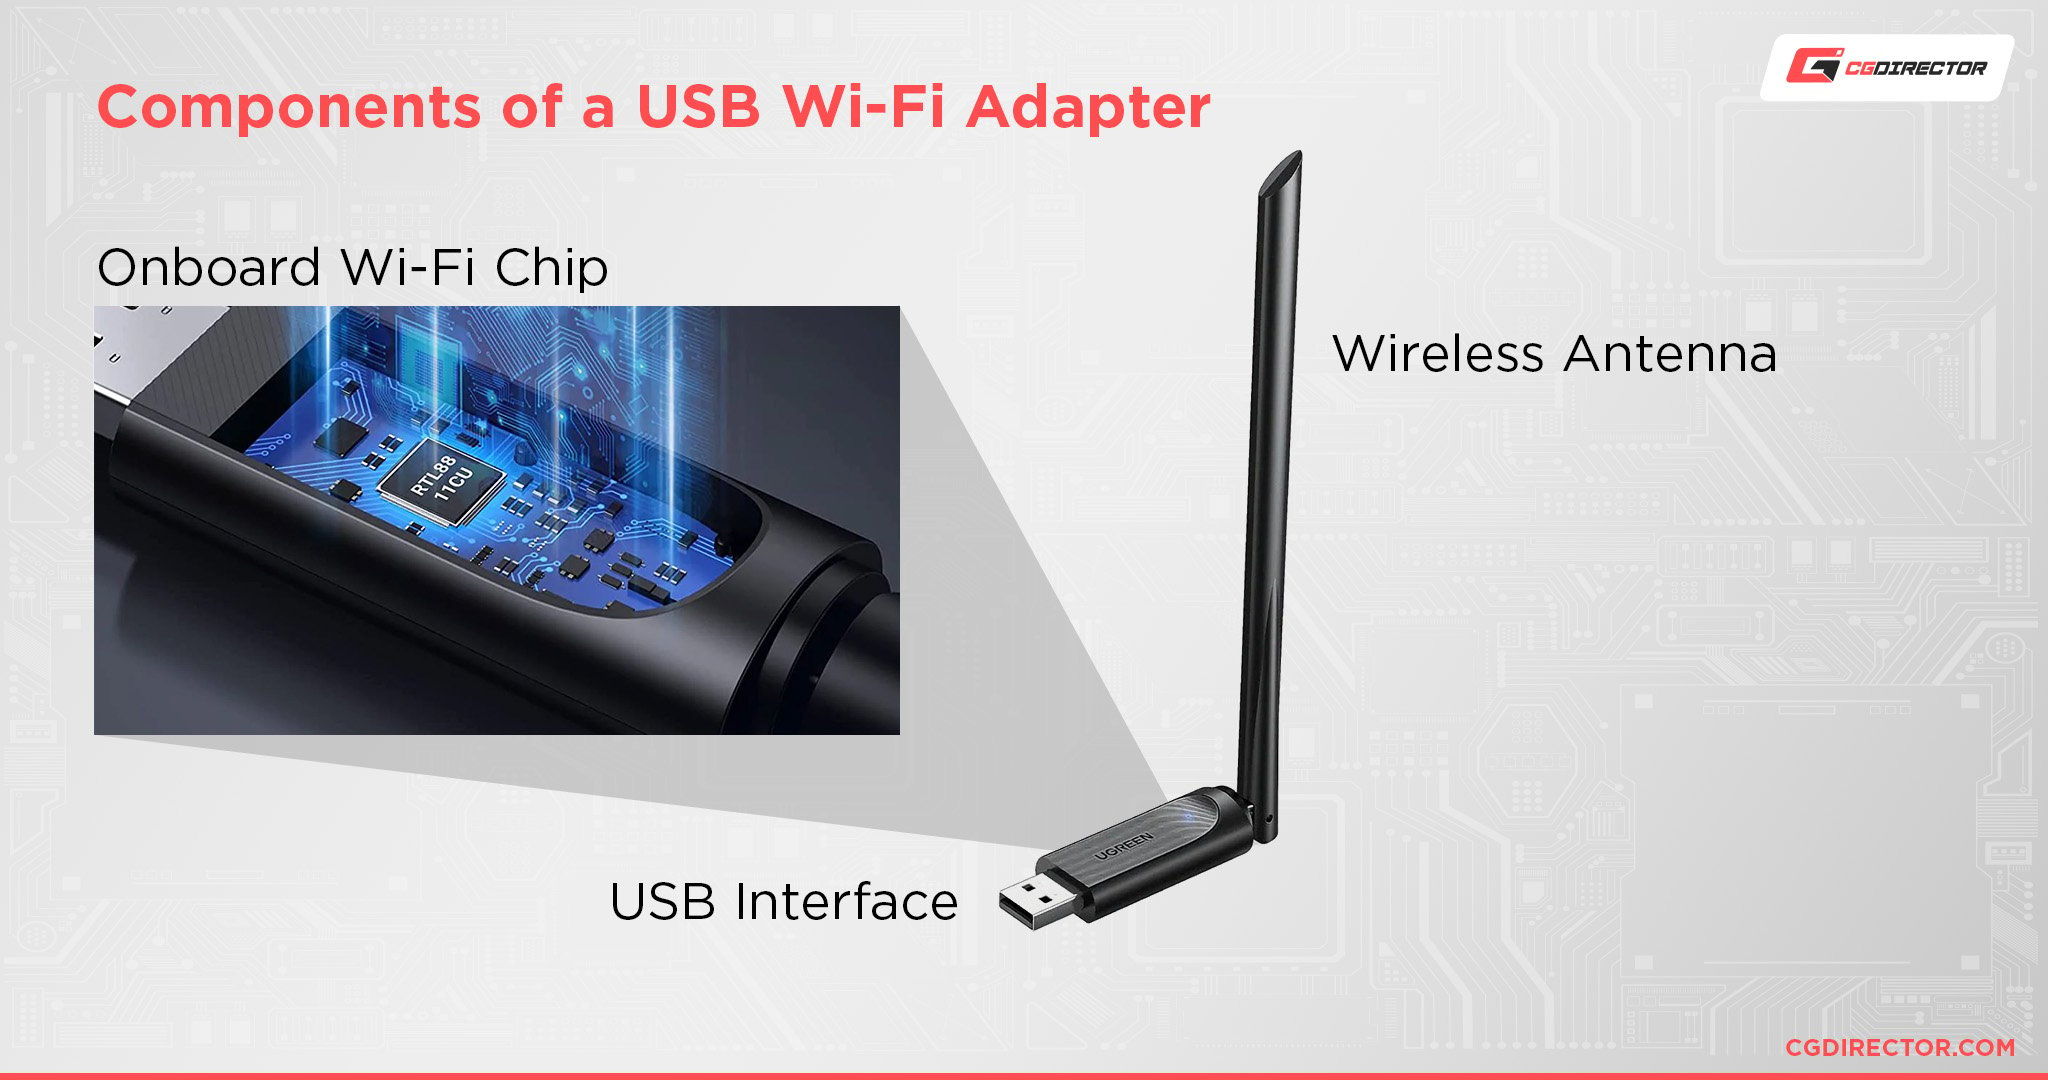 Components of a USB Wi-Fi Adapter